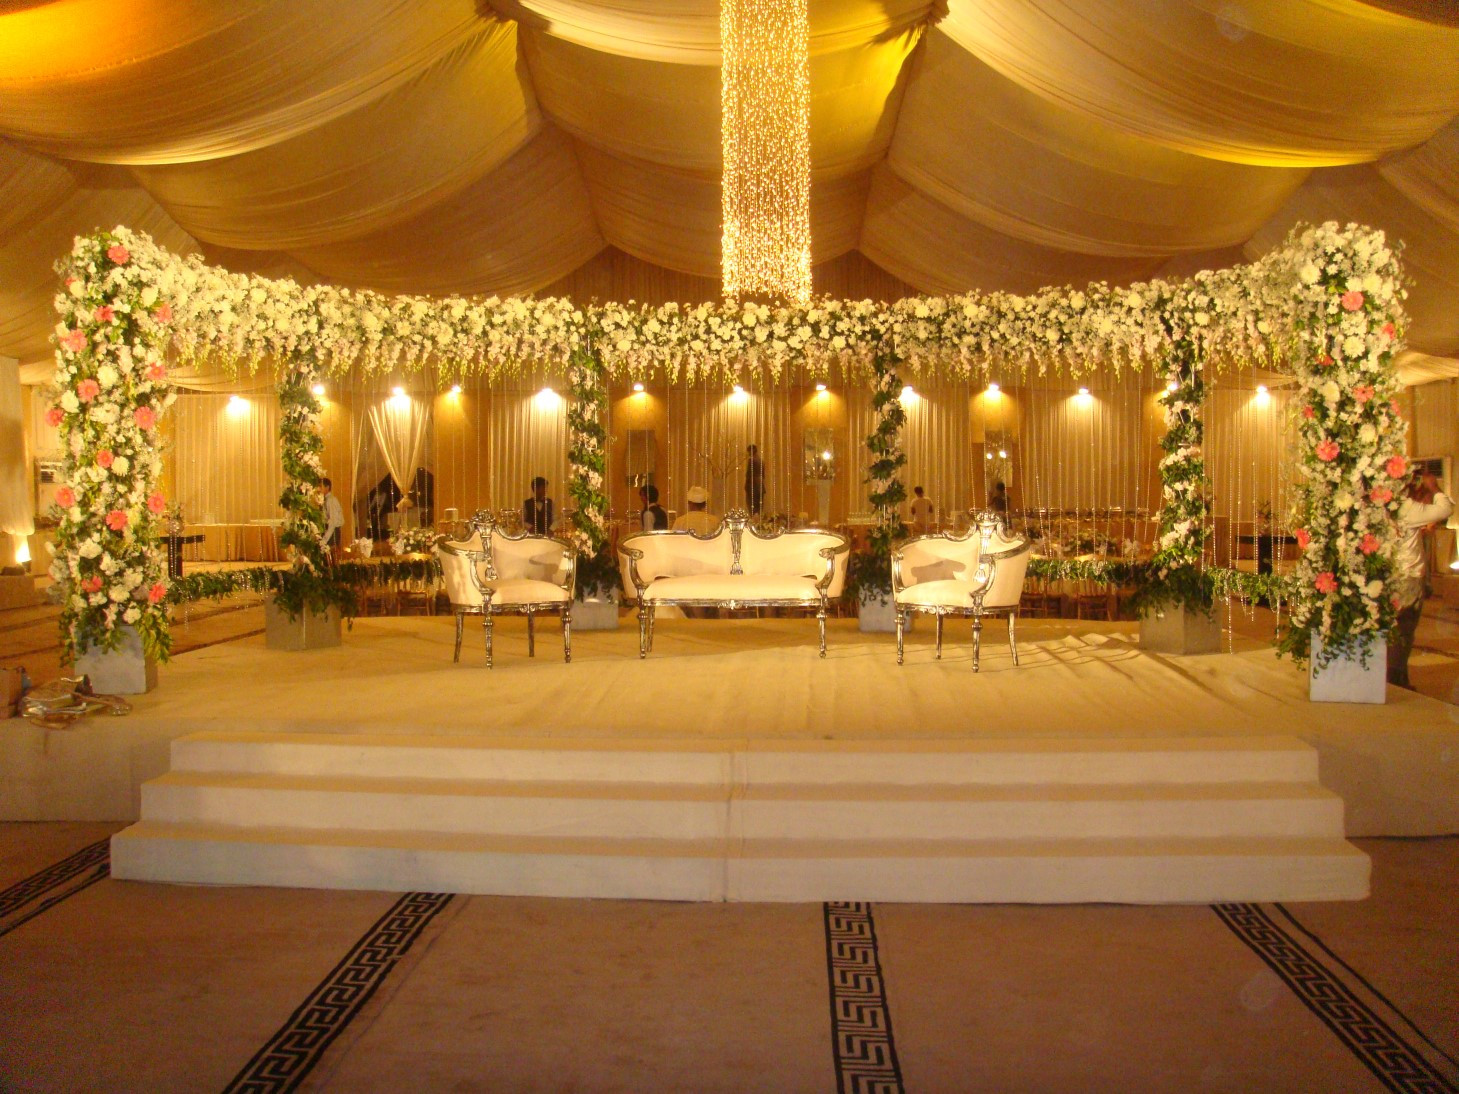 Wedding Stage Decoration
 about marriage marriage decoration photos 2013